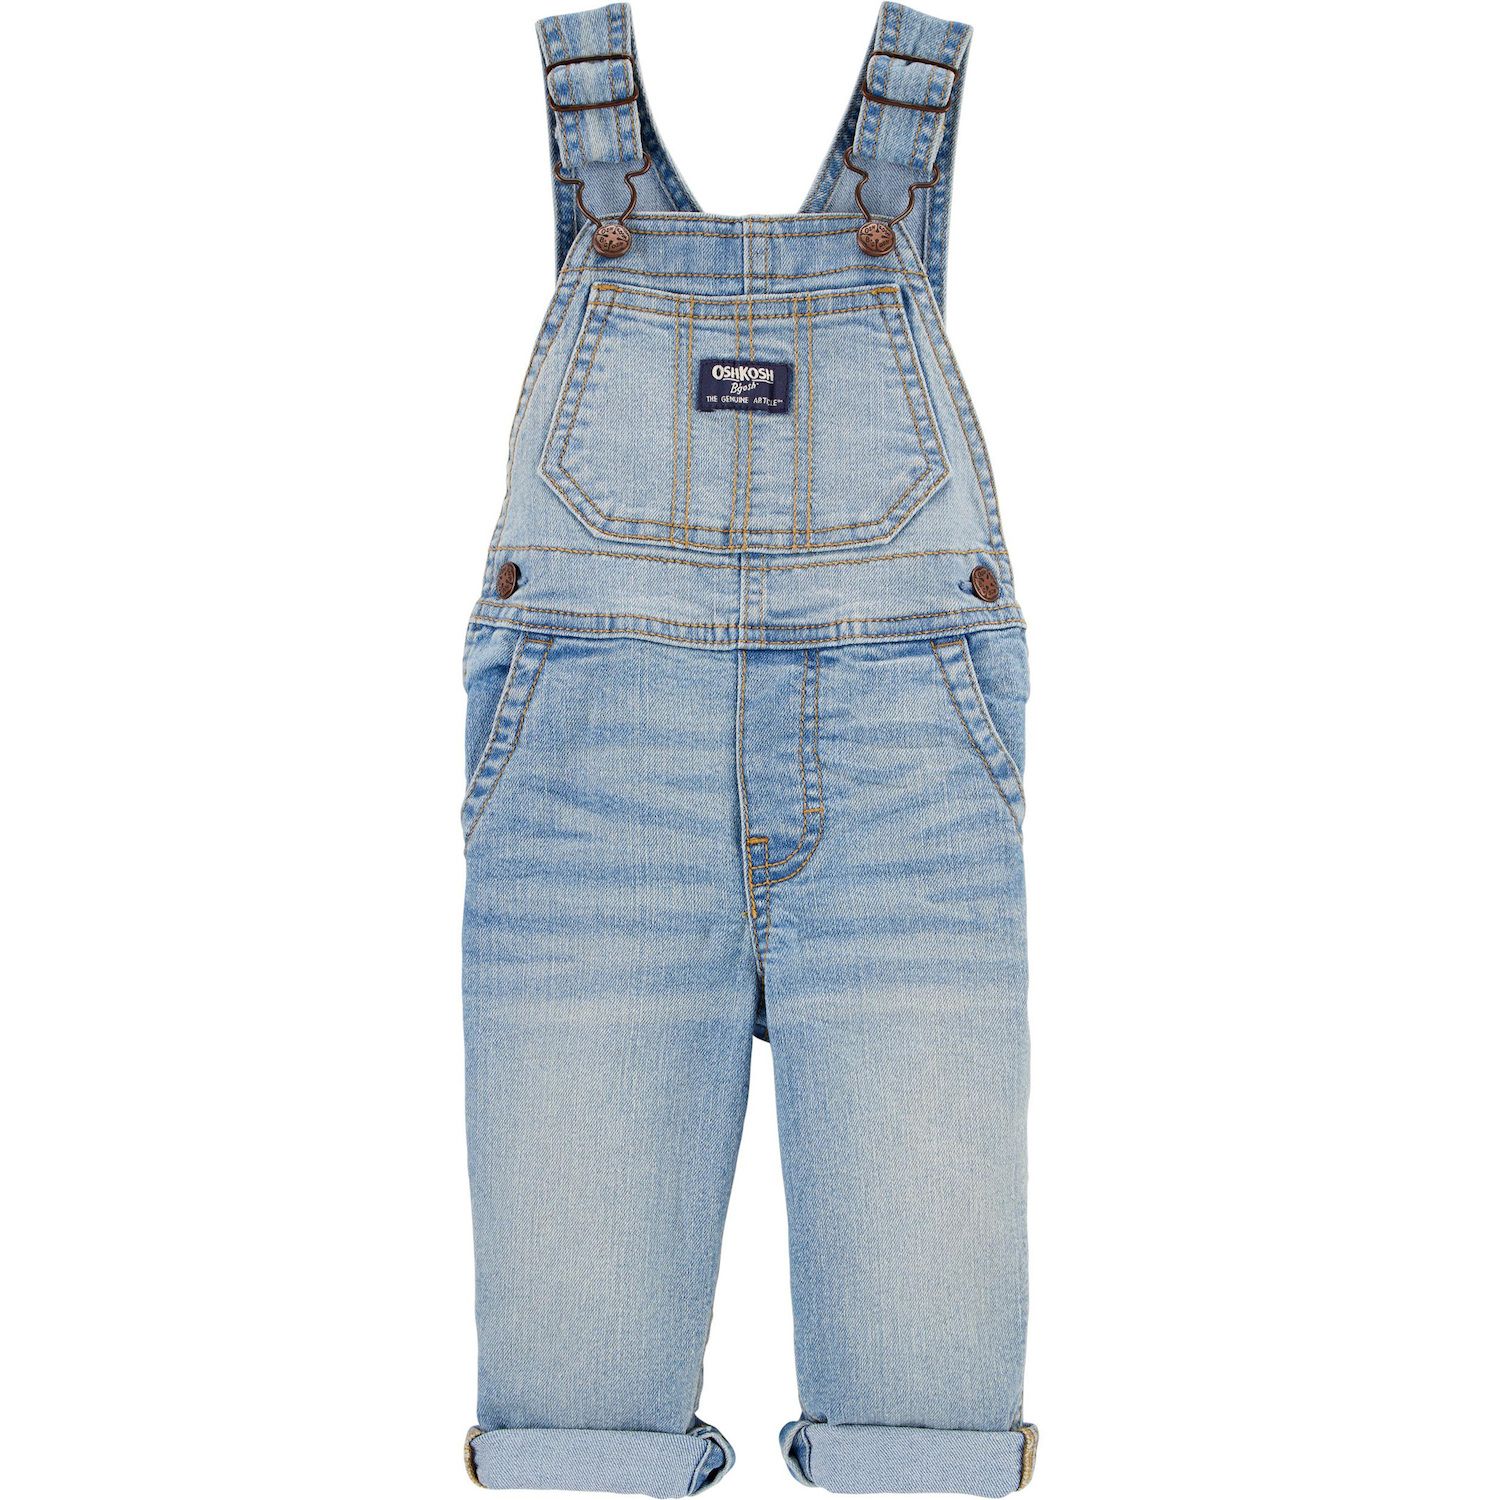 jean overalls for boys